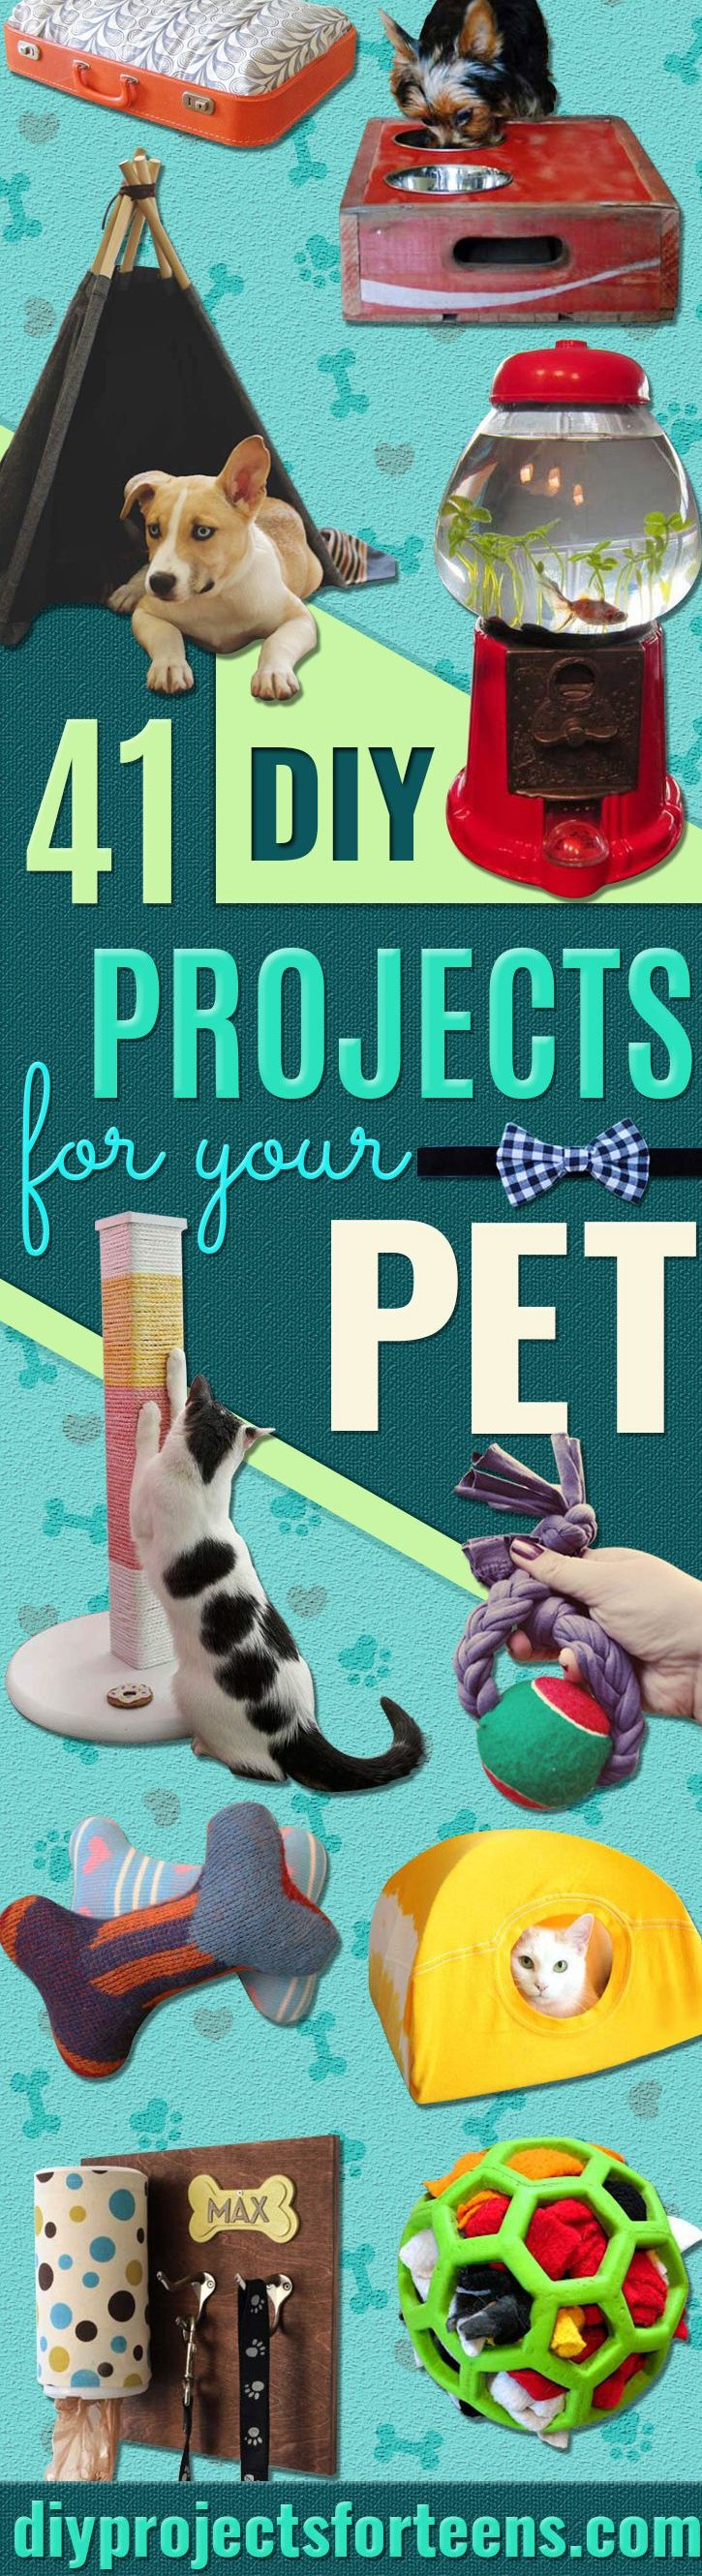 DIY Projects for Your Pet -Cat and Dog Beds, Treats, Collars and Easy Crafts to Make for Toys - Homemade Dog Biscuits, Food and Treats - Fun Ideas for Teen, Tweens and Adults to Make for Pets